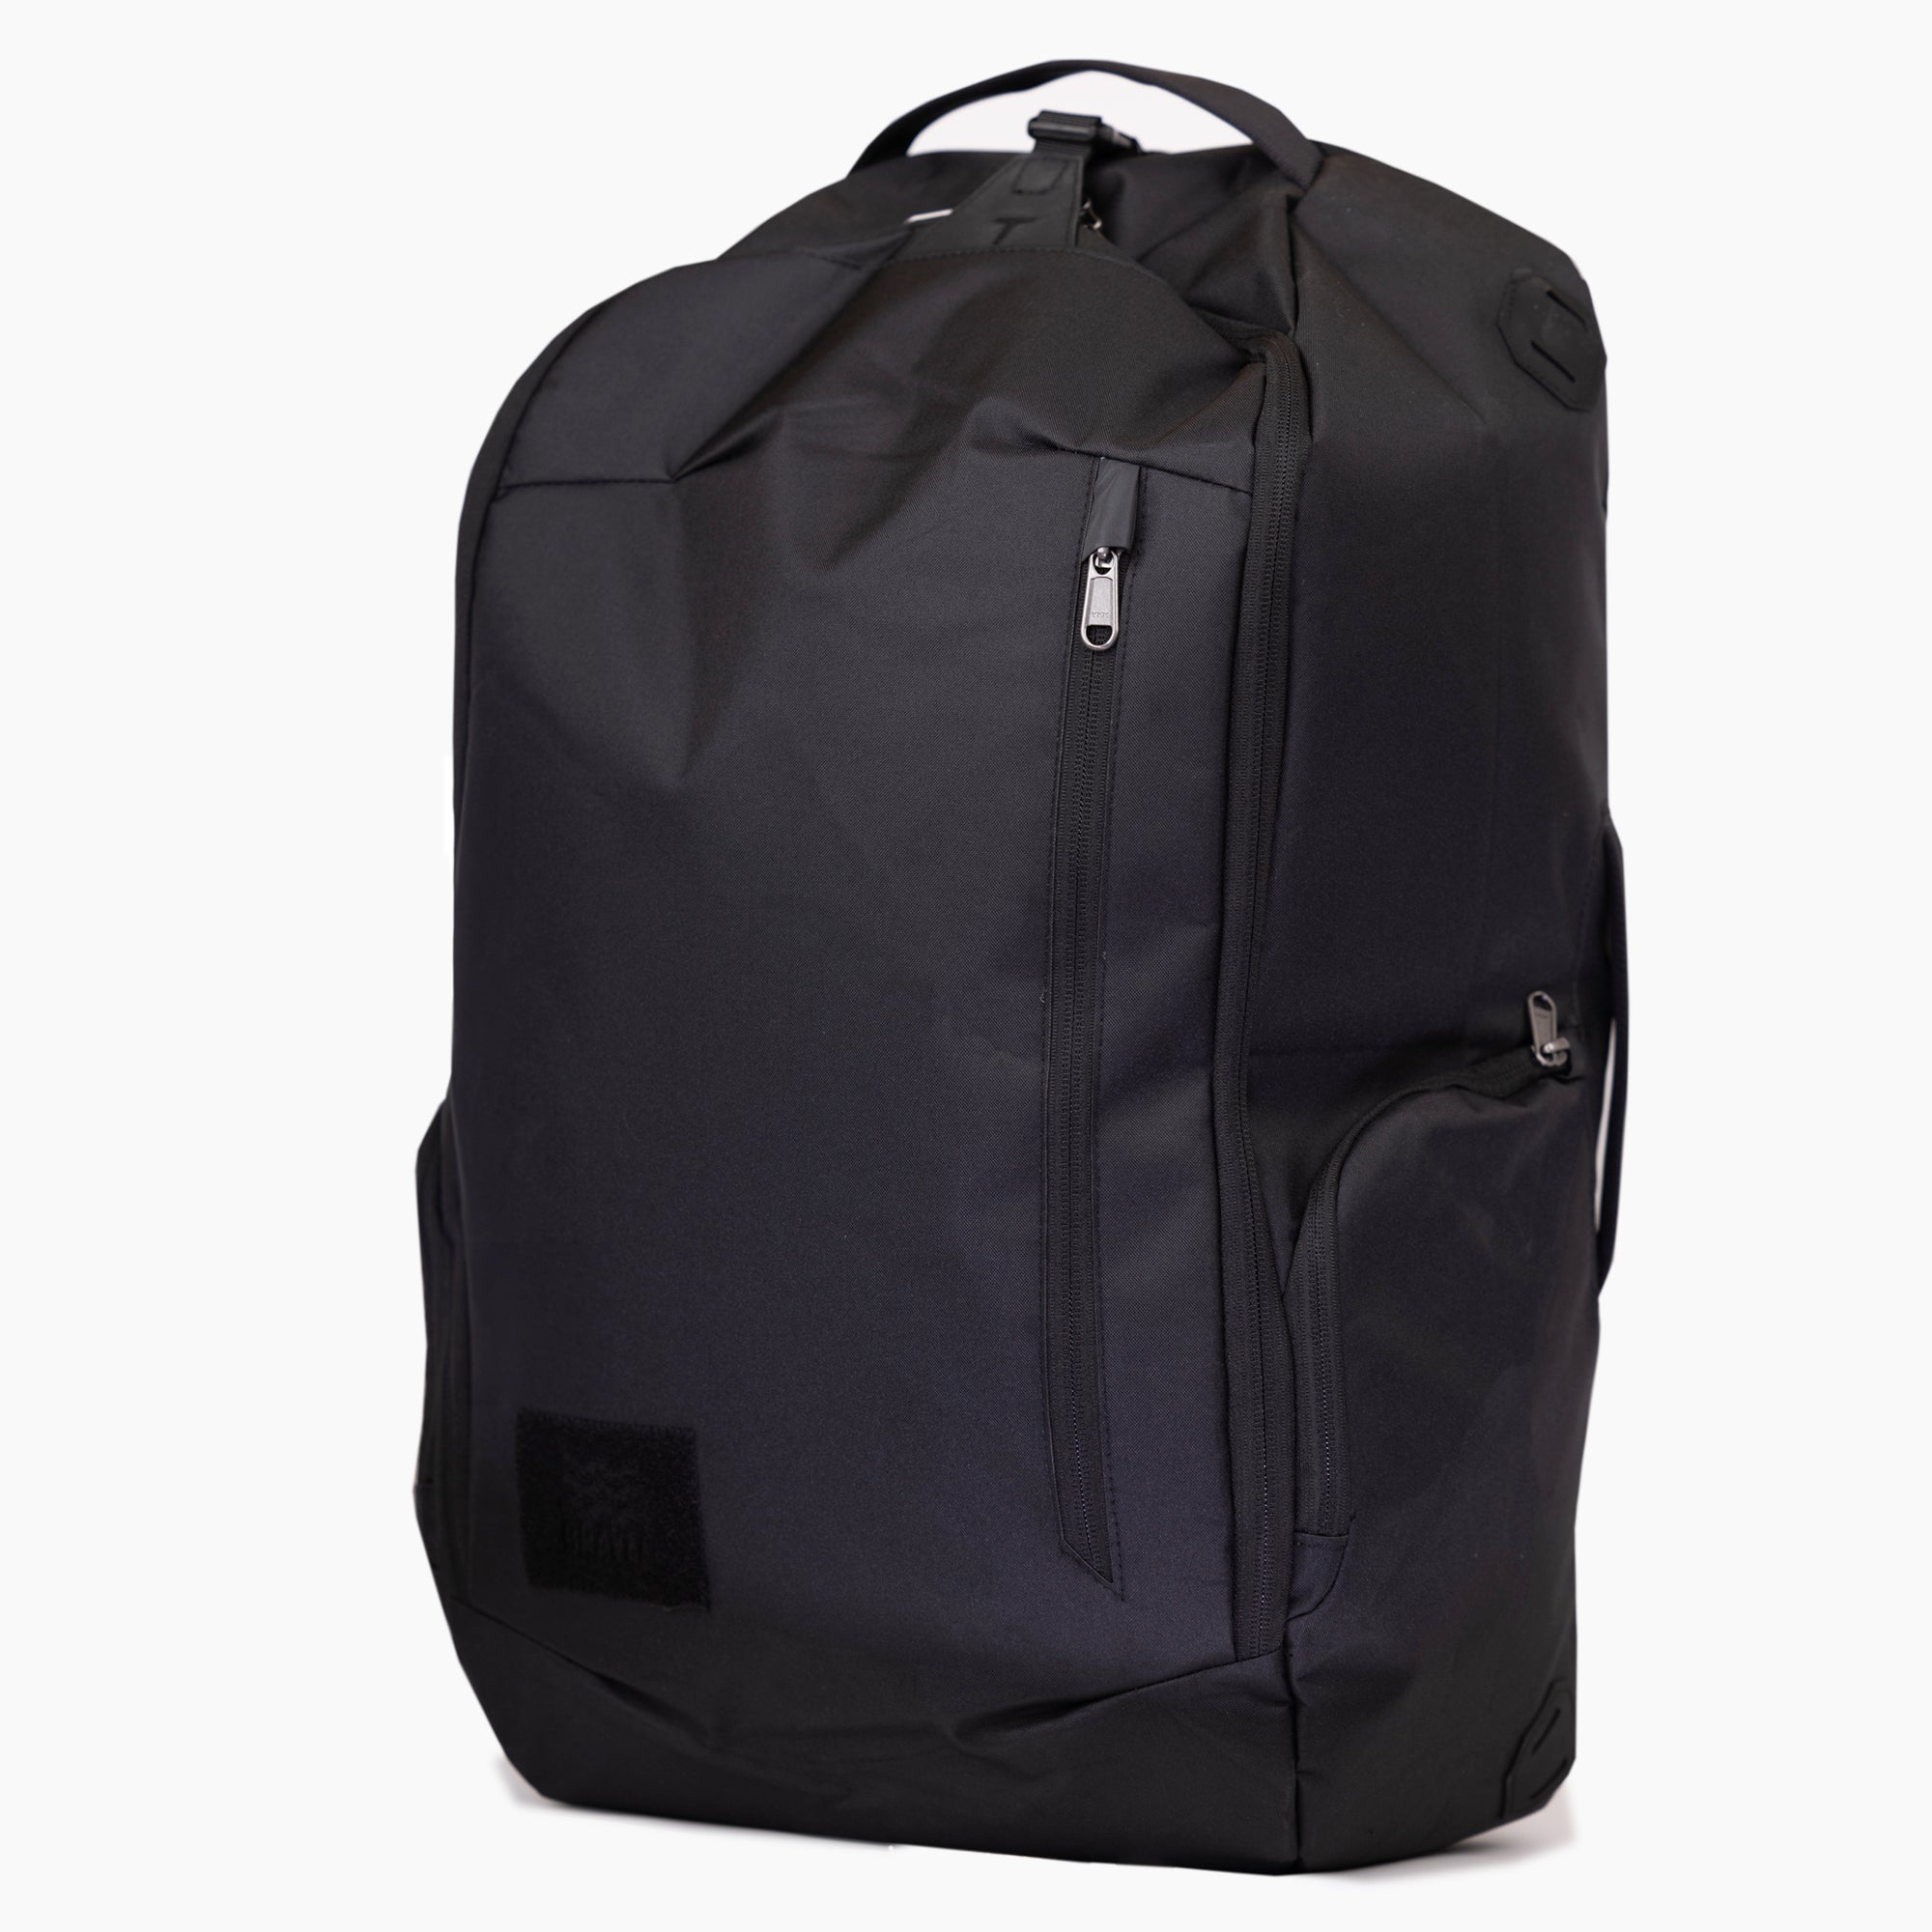 SET | Duffle Bag, Backpack Straps, & Packing Cubes